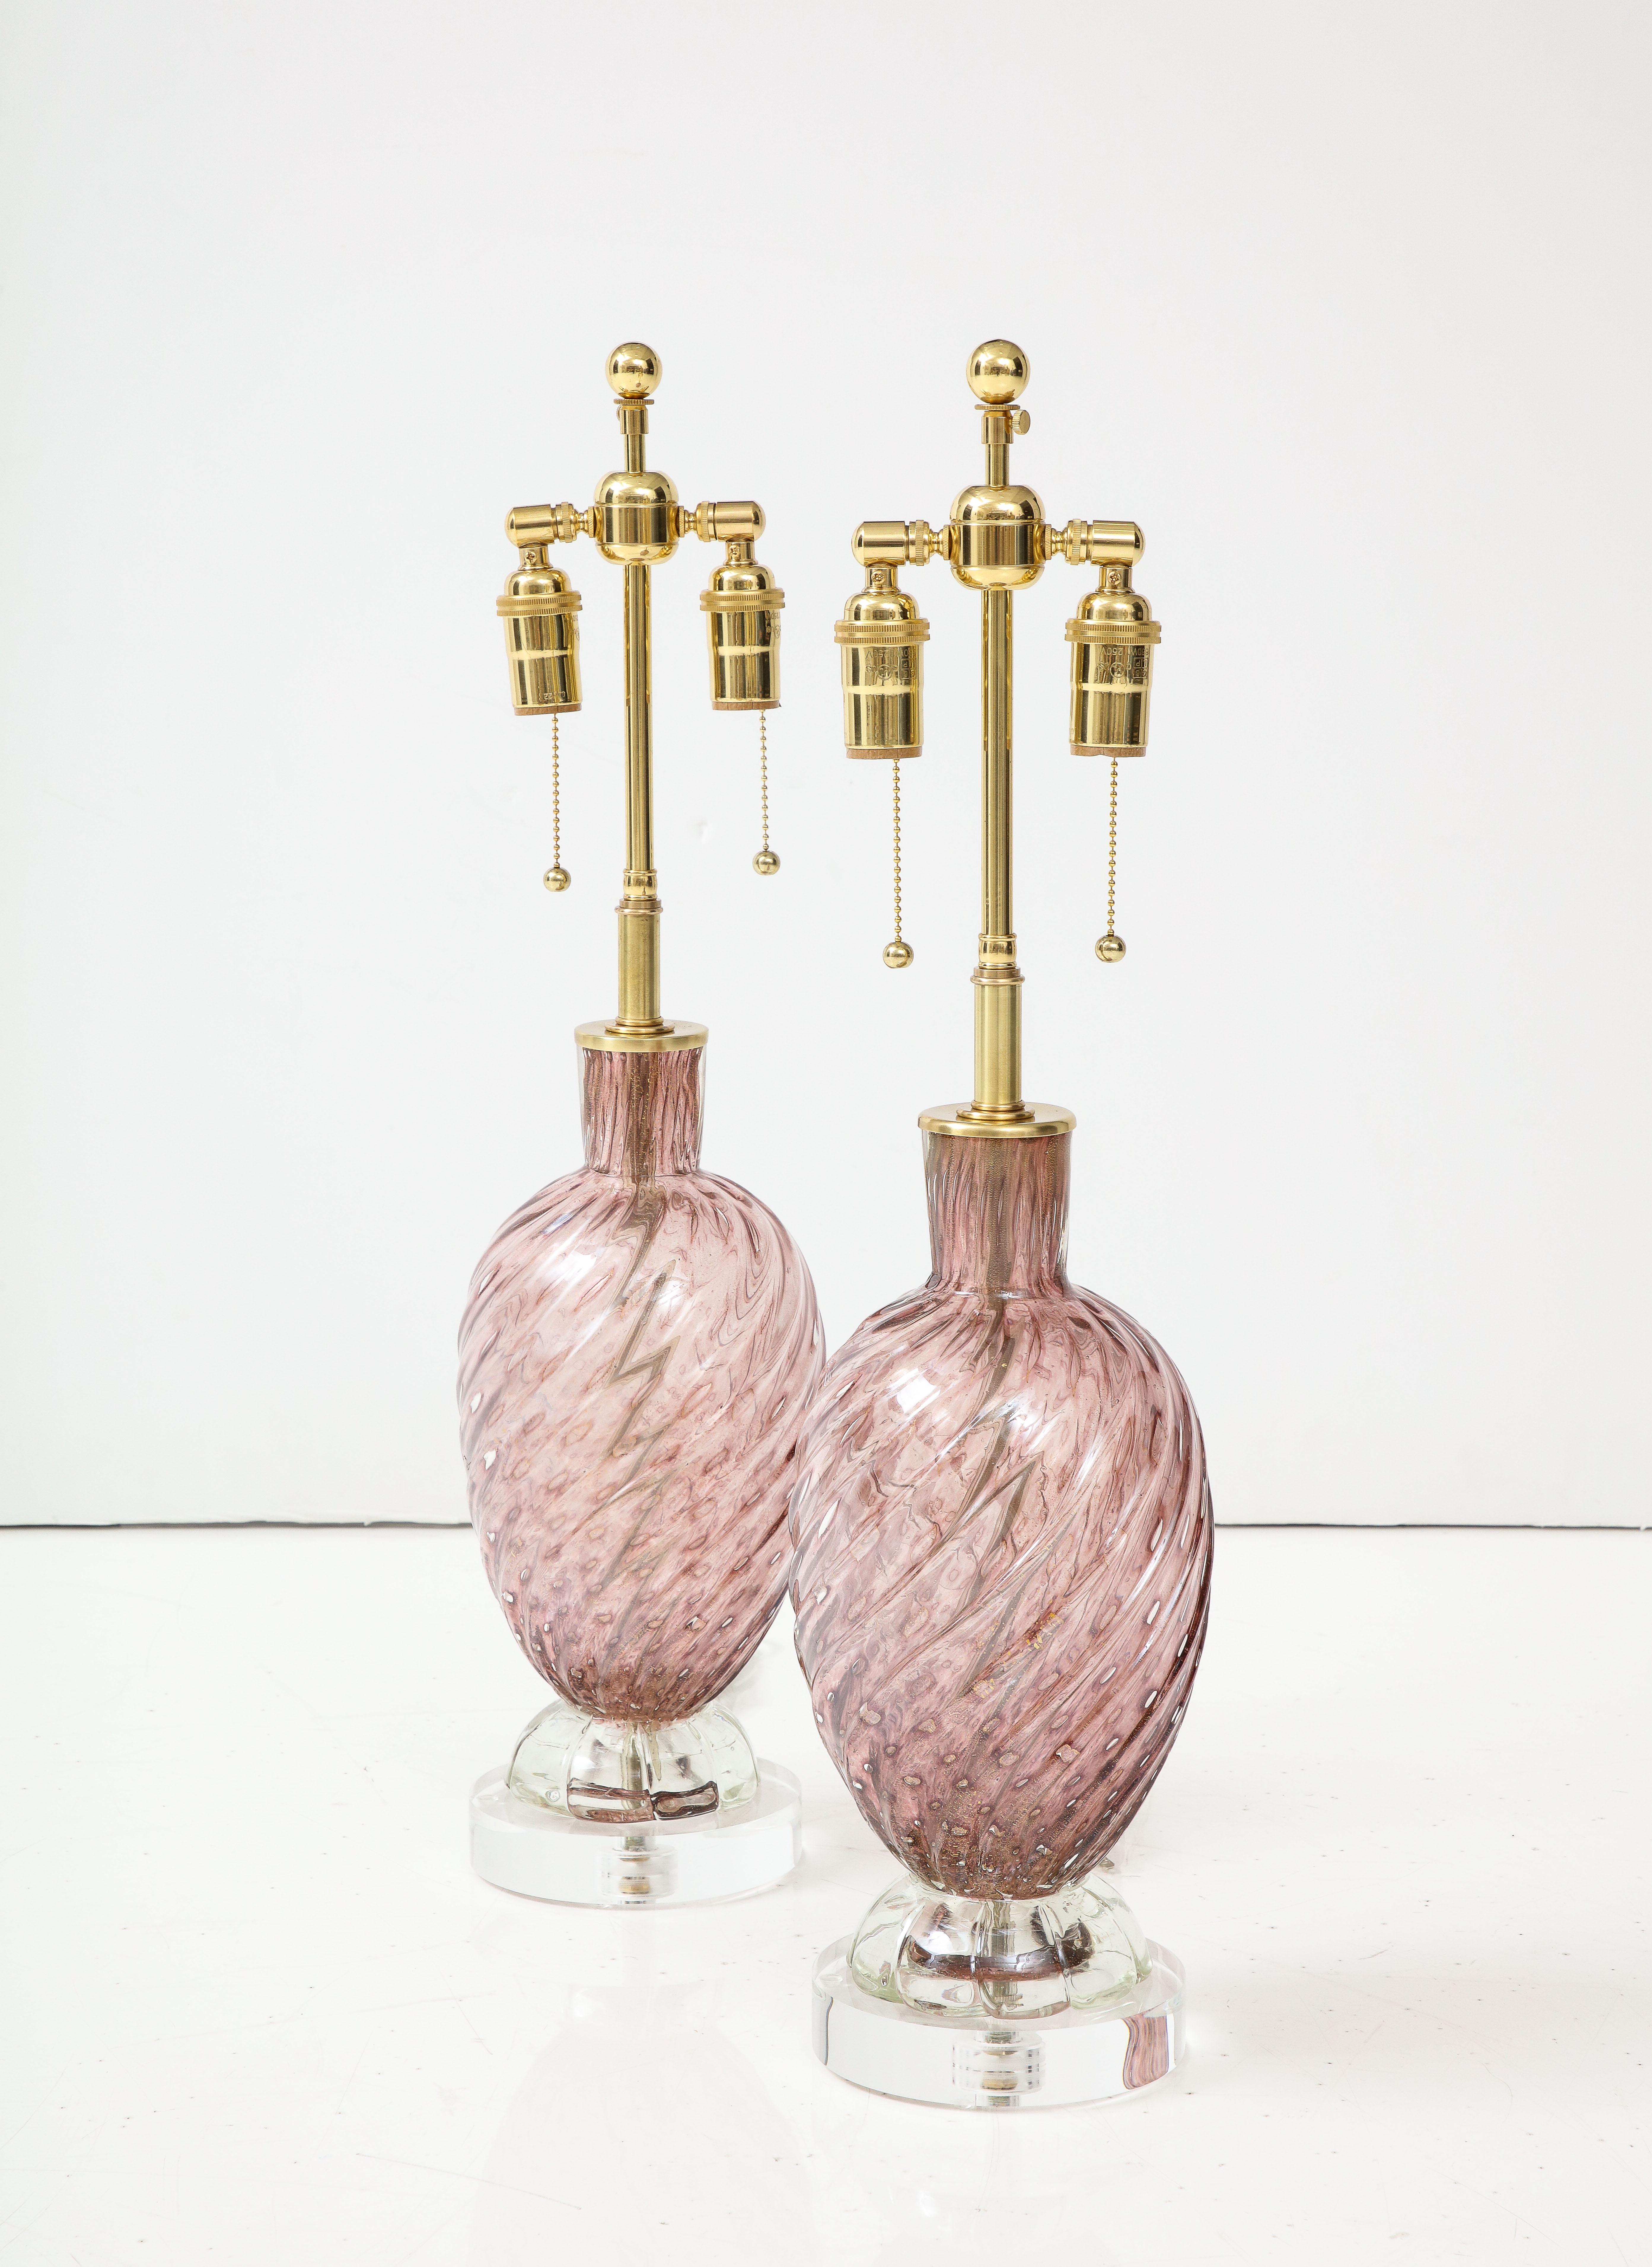 Pair of Amethyst colored Murano glass lamps with a swirled design and gold  dust inclusions. 
The lamps sit on thick lucite bases and they have been newly rewired with adjustable polished brass double clusters that take standard size light bulbs.
60